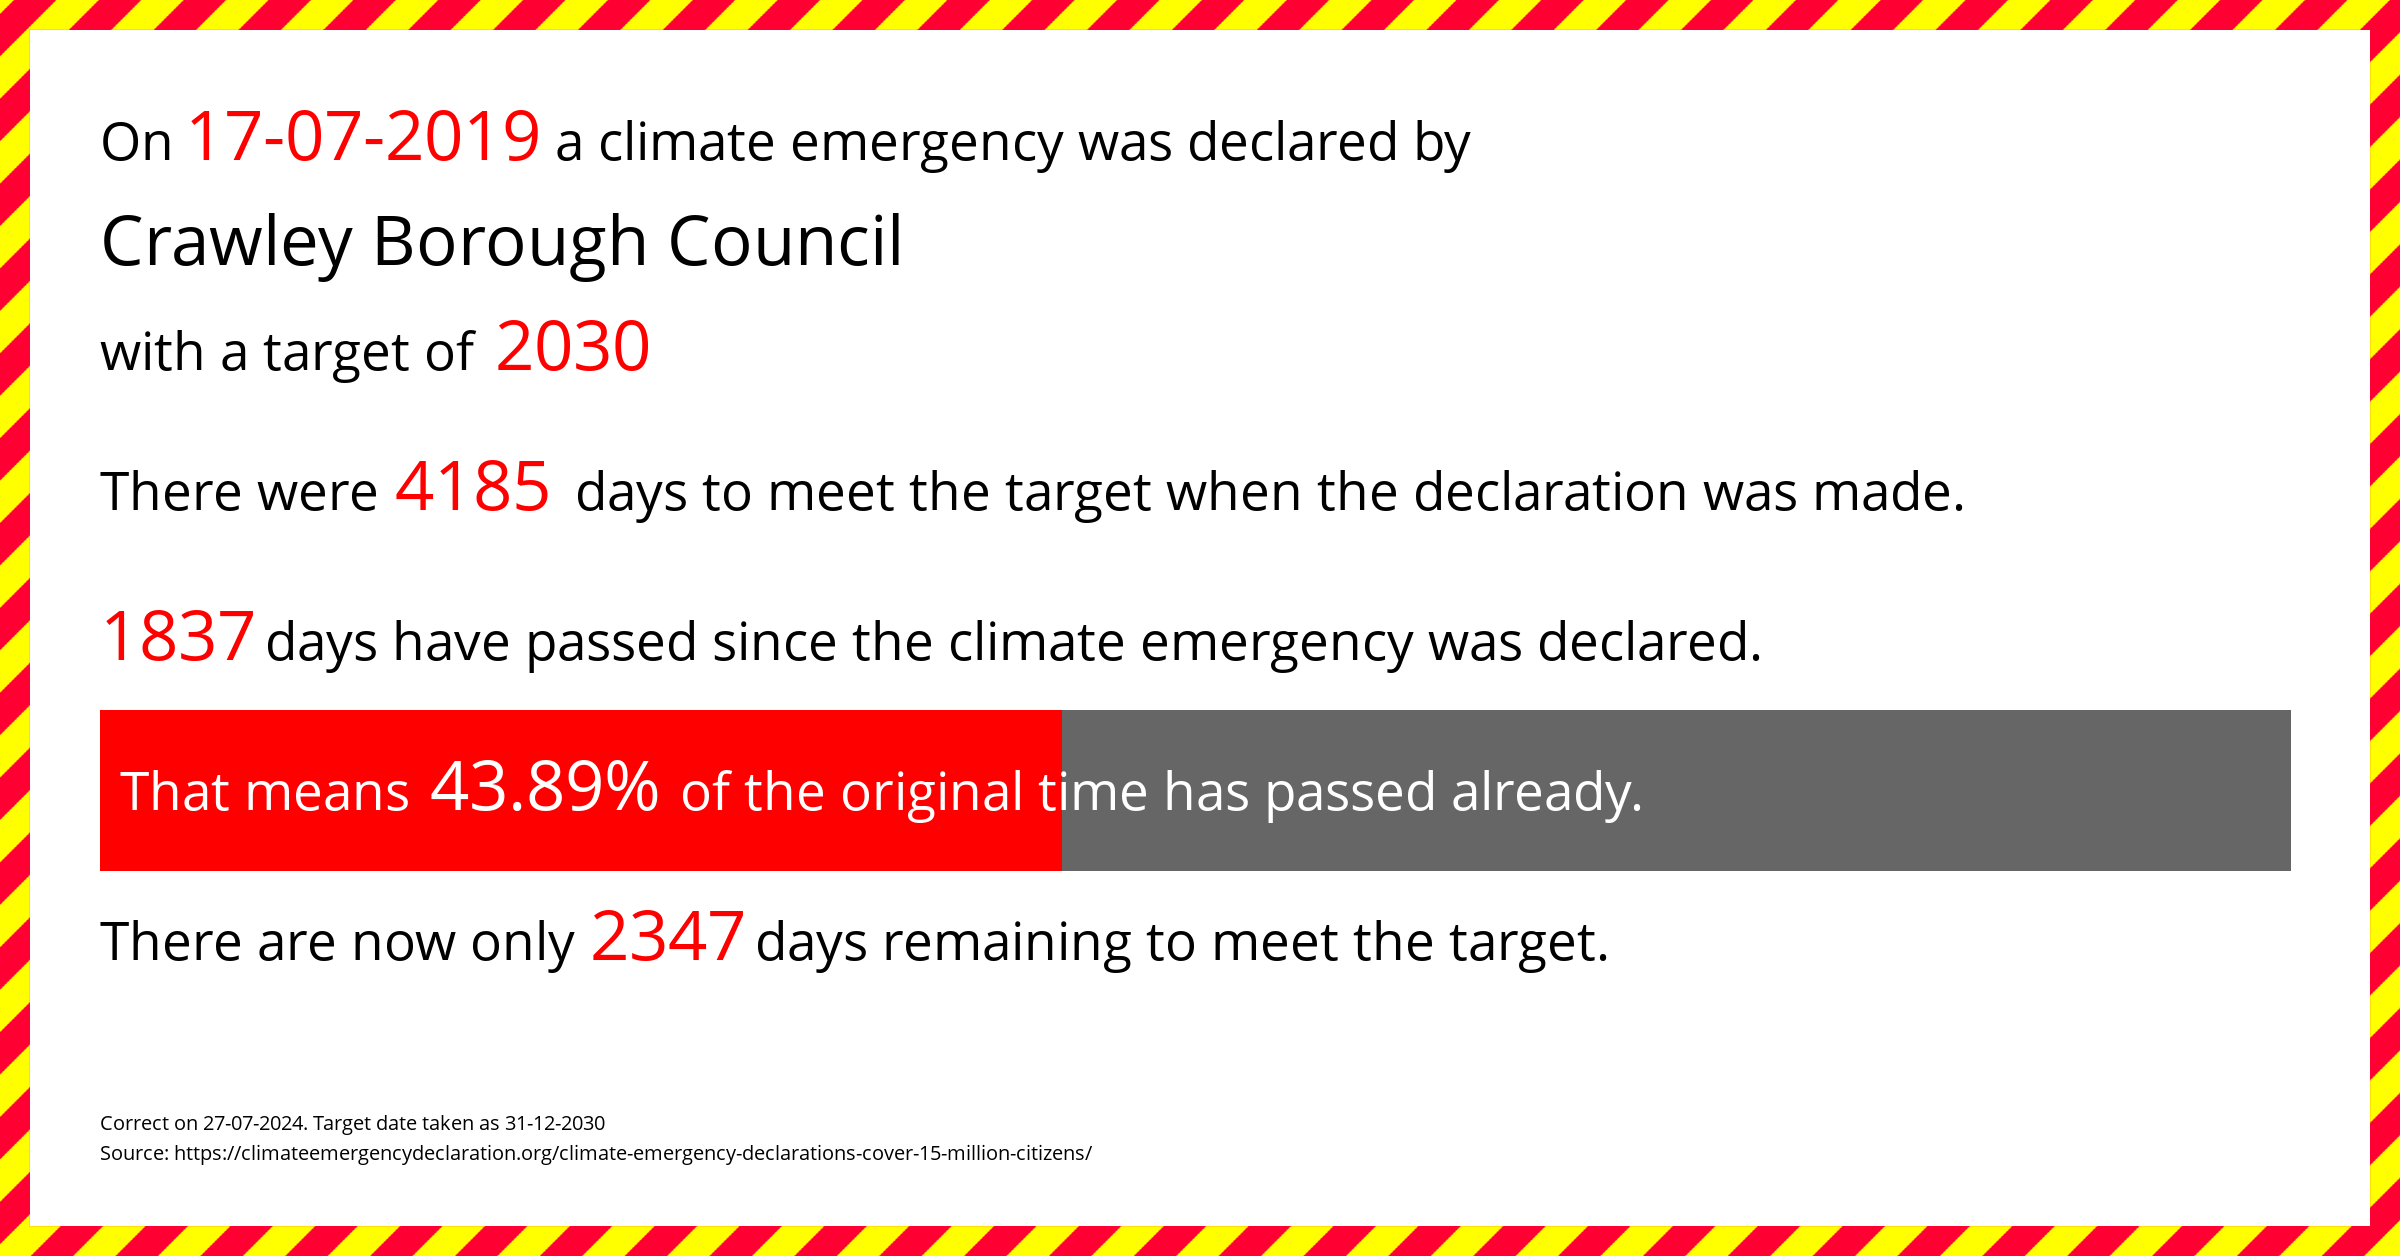 Crawley Borough Council declared a Climate emergency on Wednesday 17th July 2019, with a target of 2030.